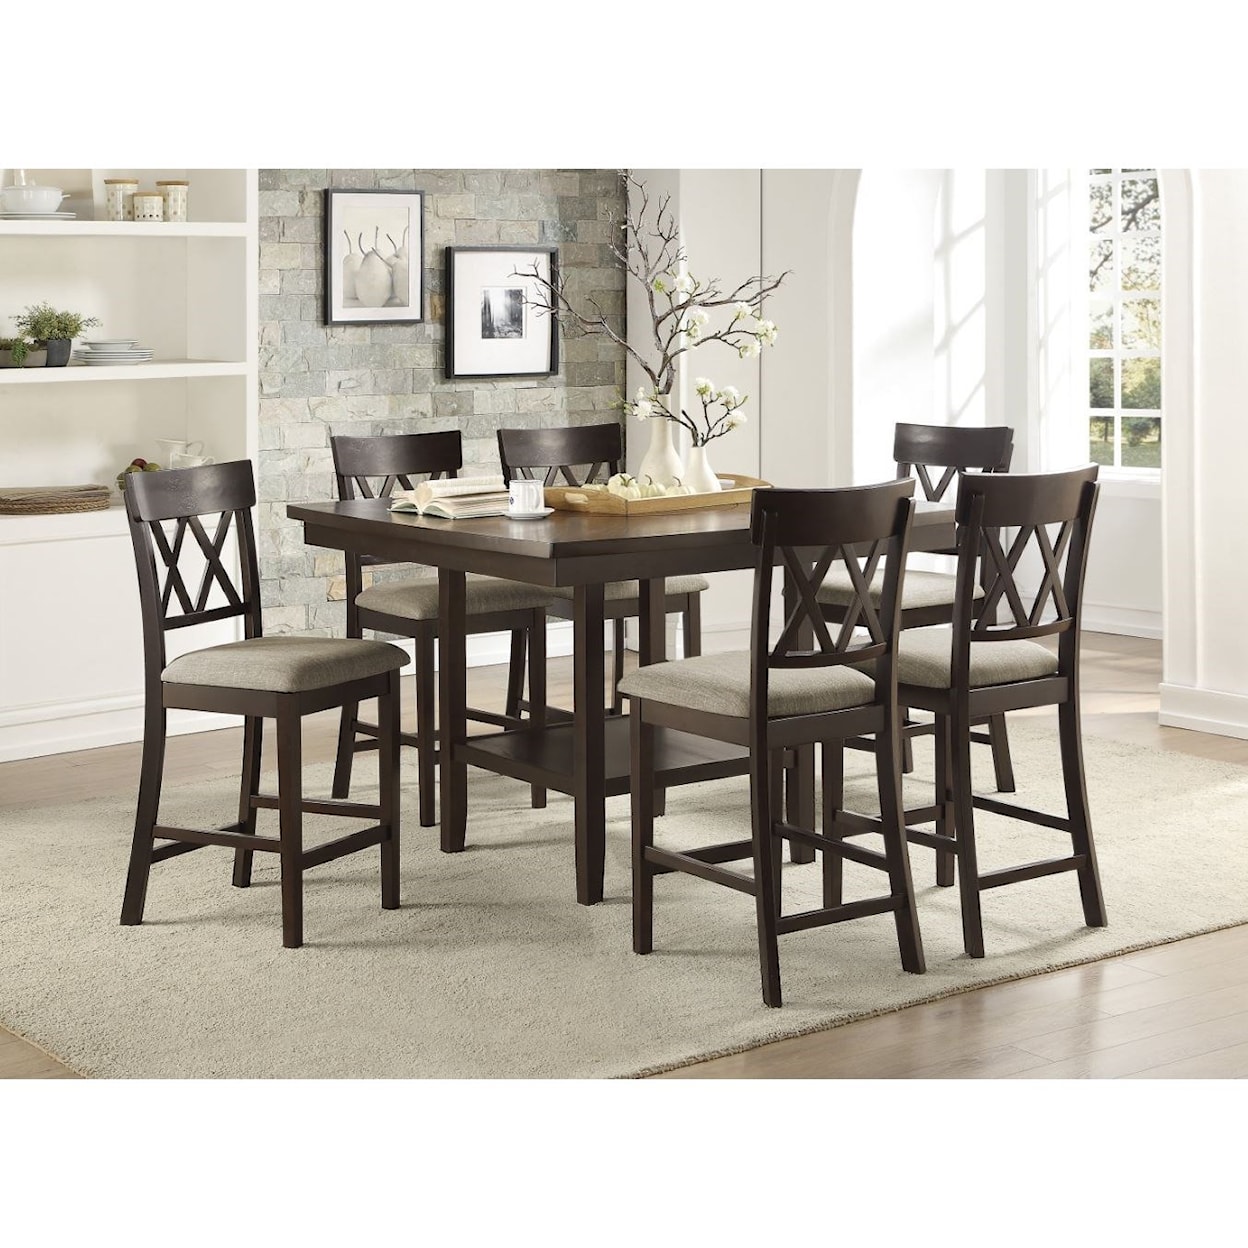 Homelegance Balin 7-Piece Counter Height Table and Chair Set